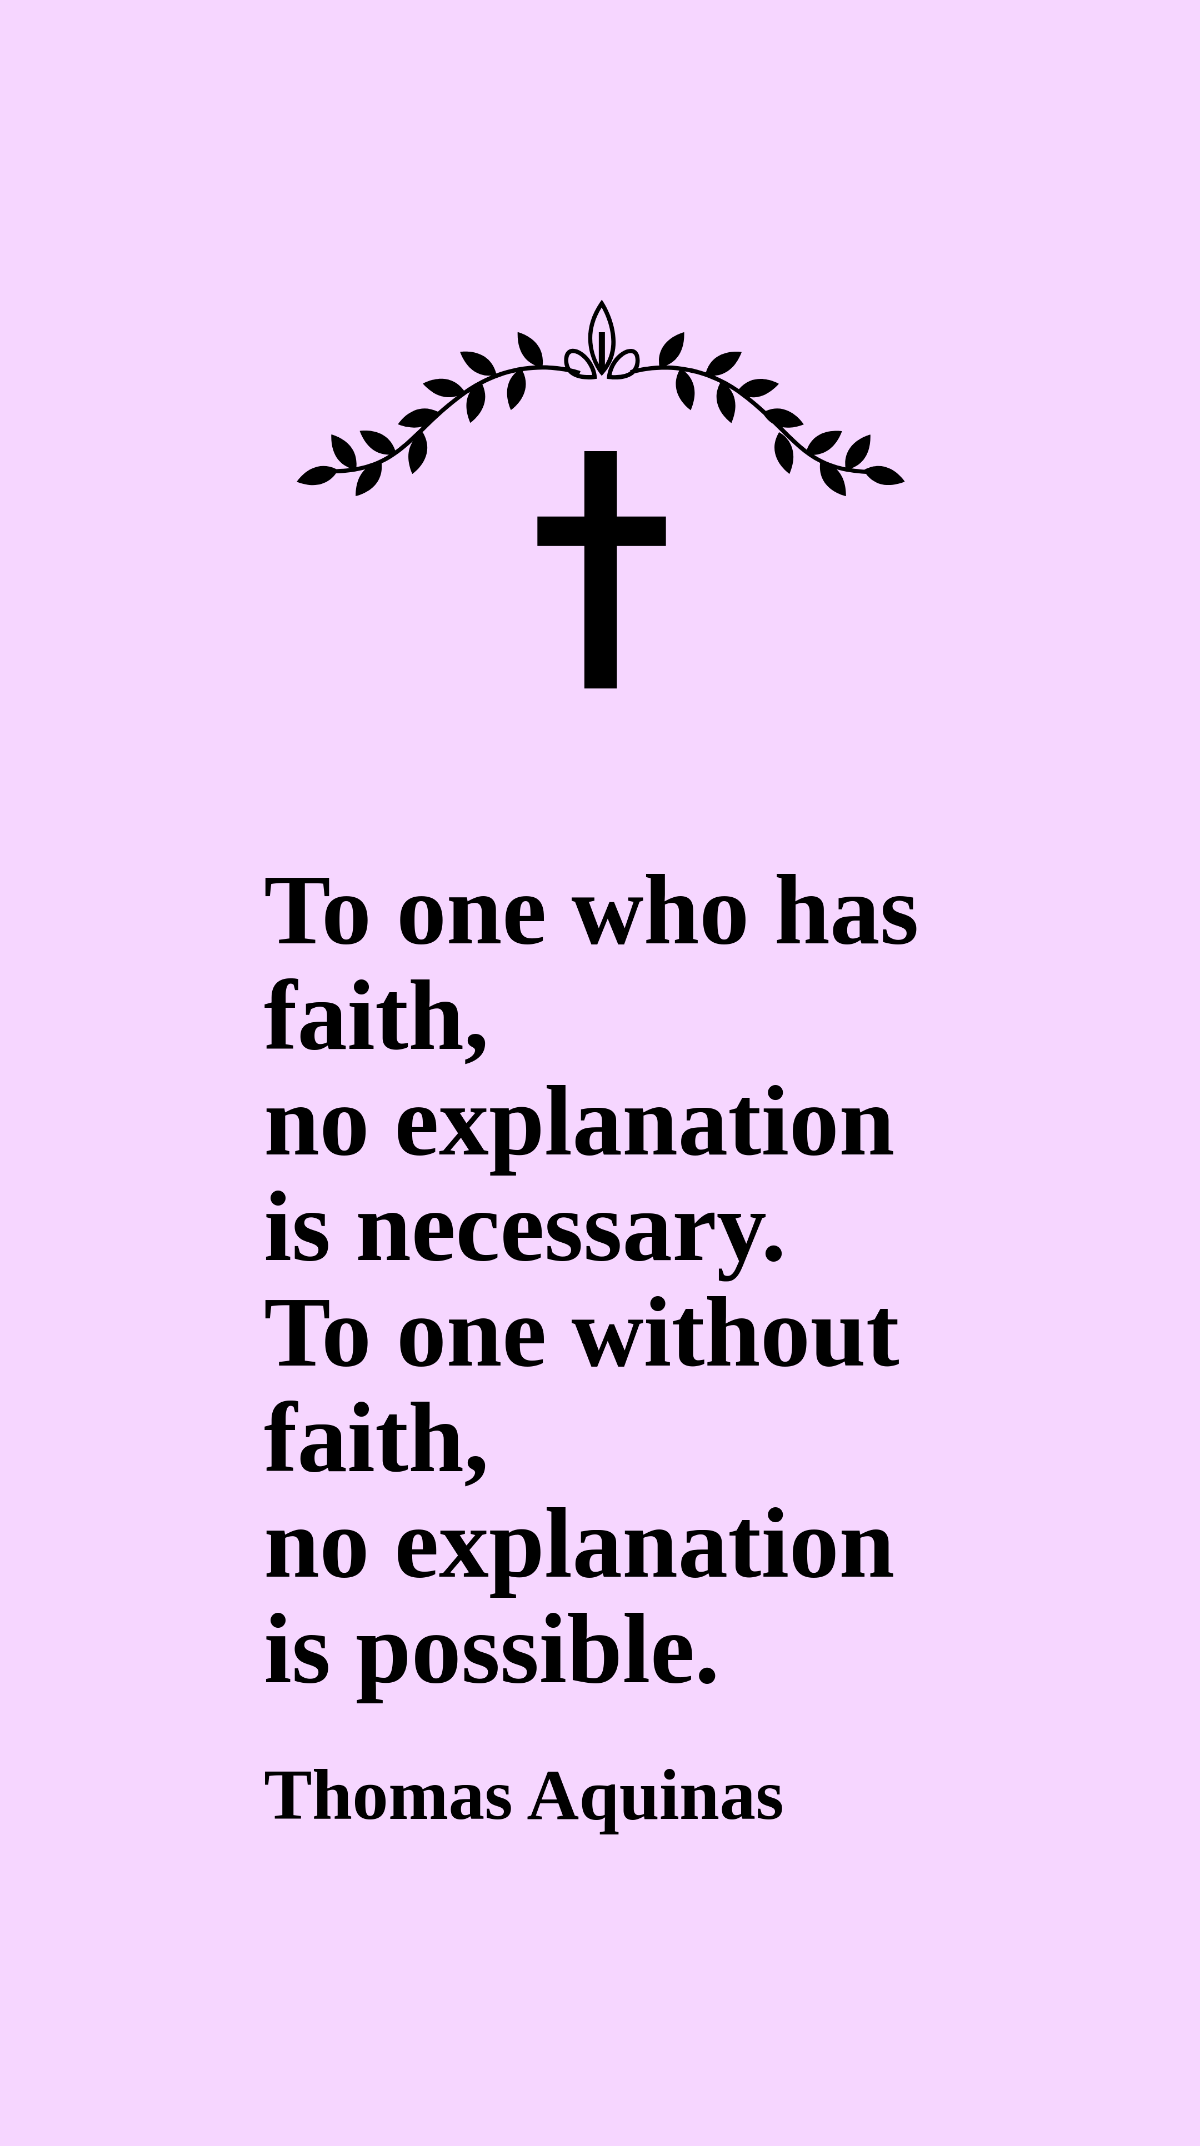 Thomas Aquinas - To one who has faith, no explanation is necessary. To one without faith, no explanation is possible. Template